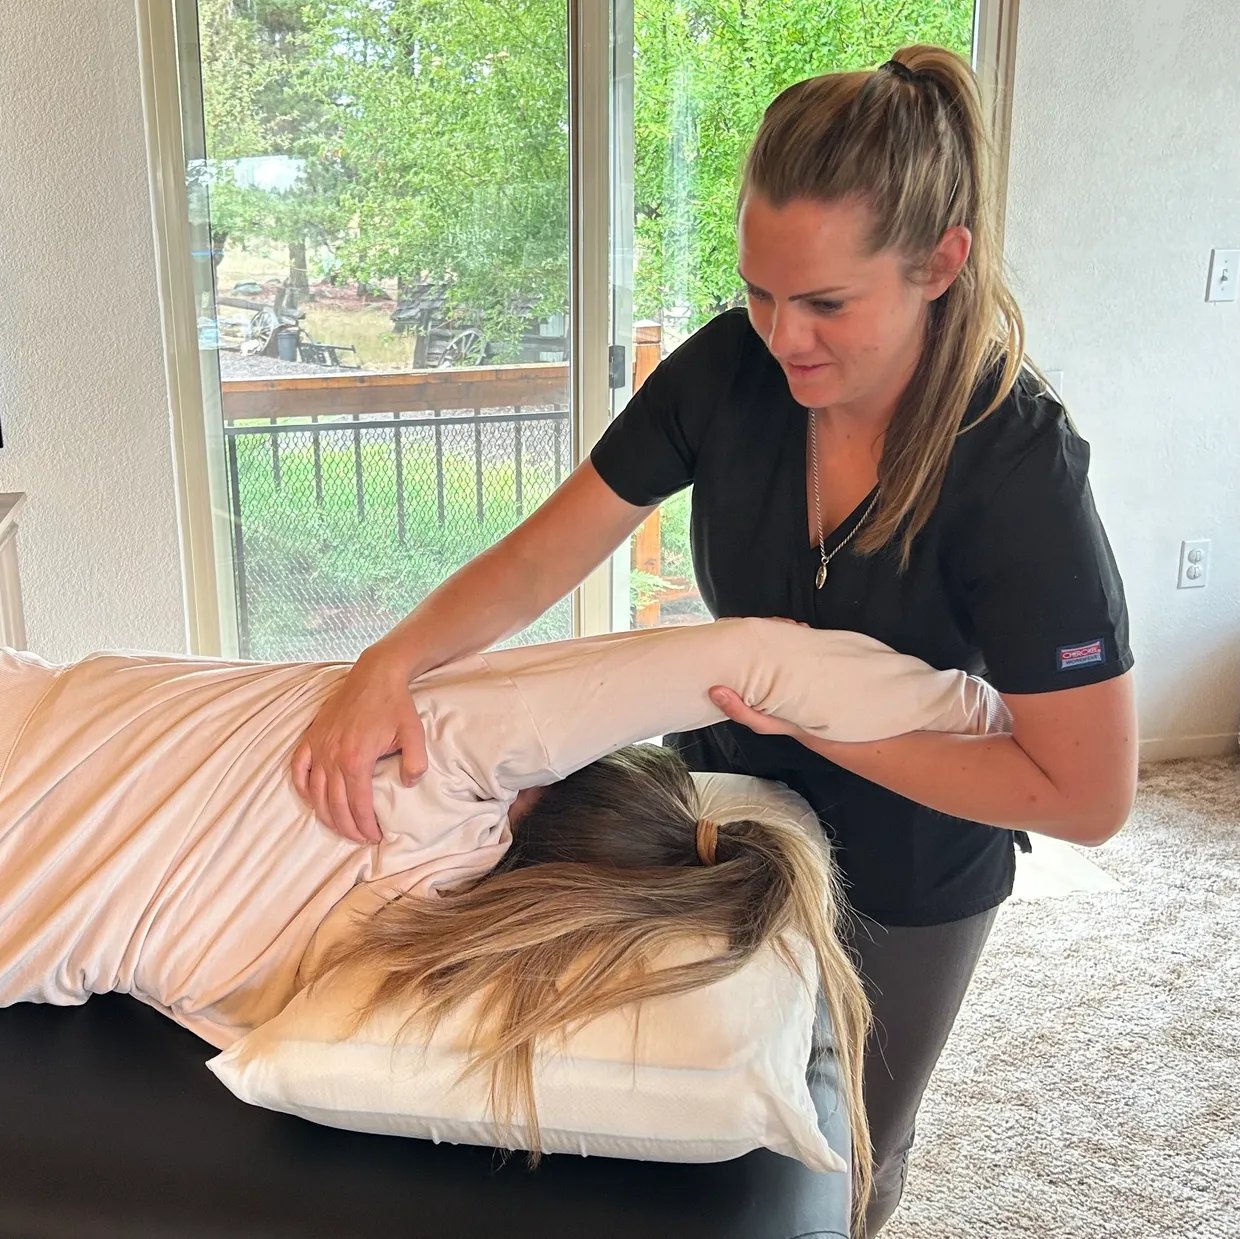 Sparks Mobile Physical Therapy - Kelley Urionaguena - Sparks, NV - Body Mobility Assessment